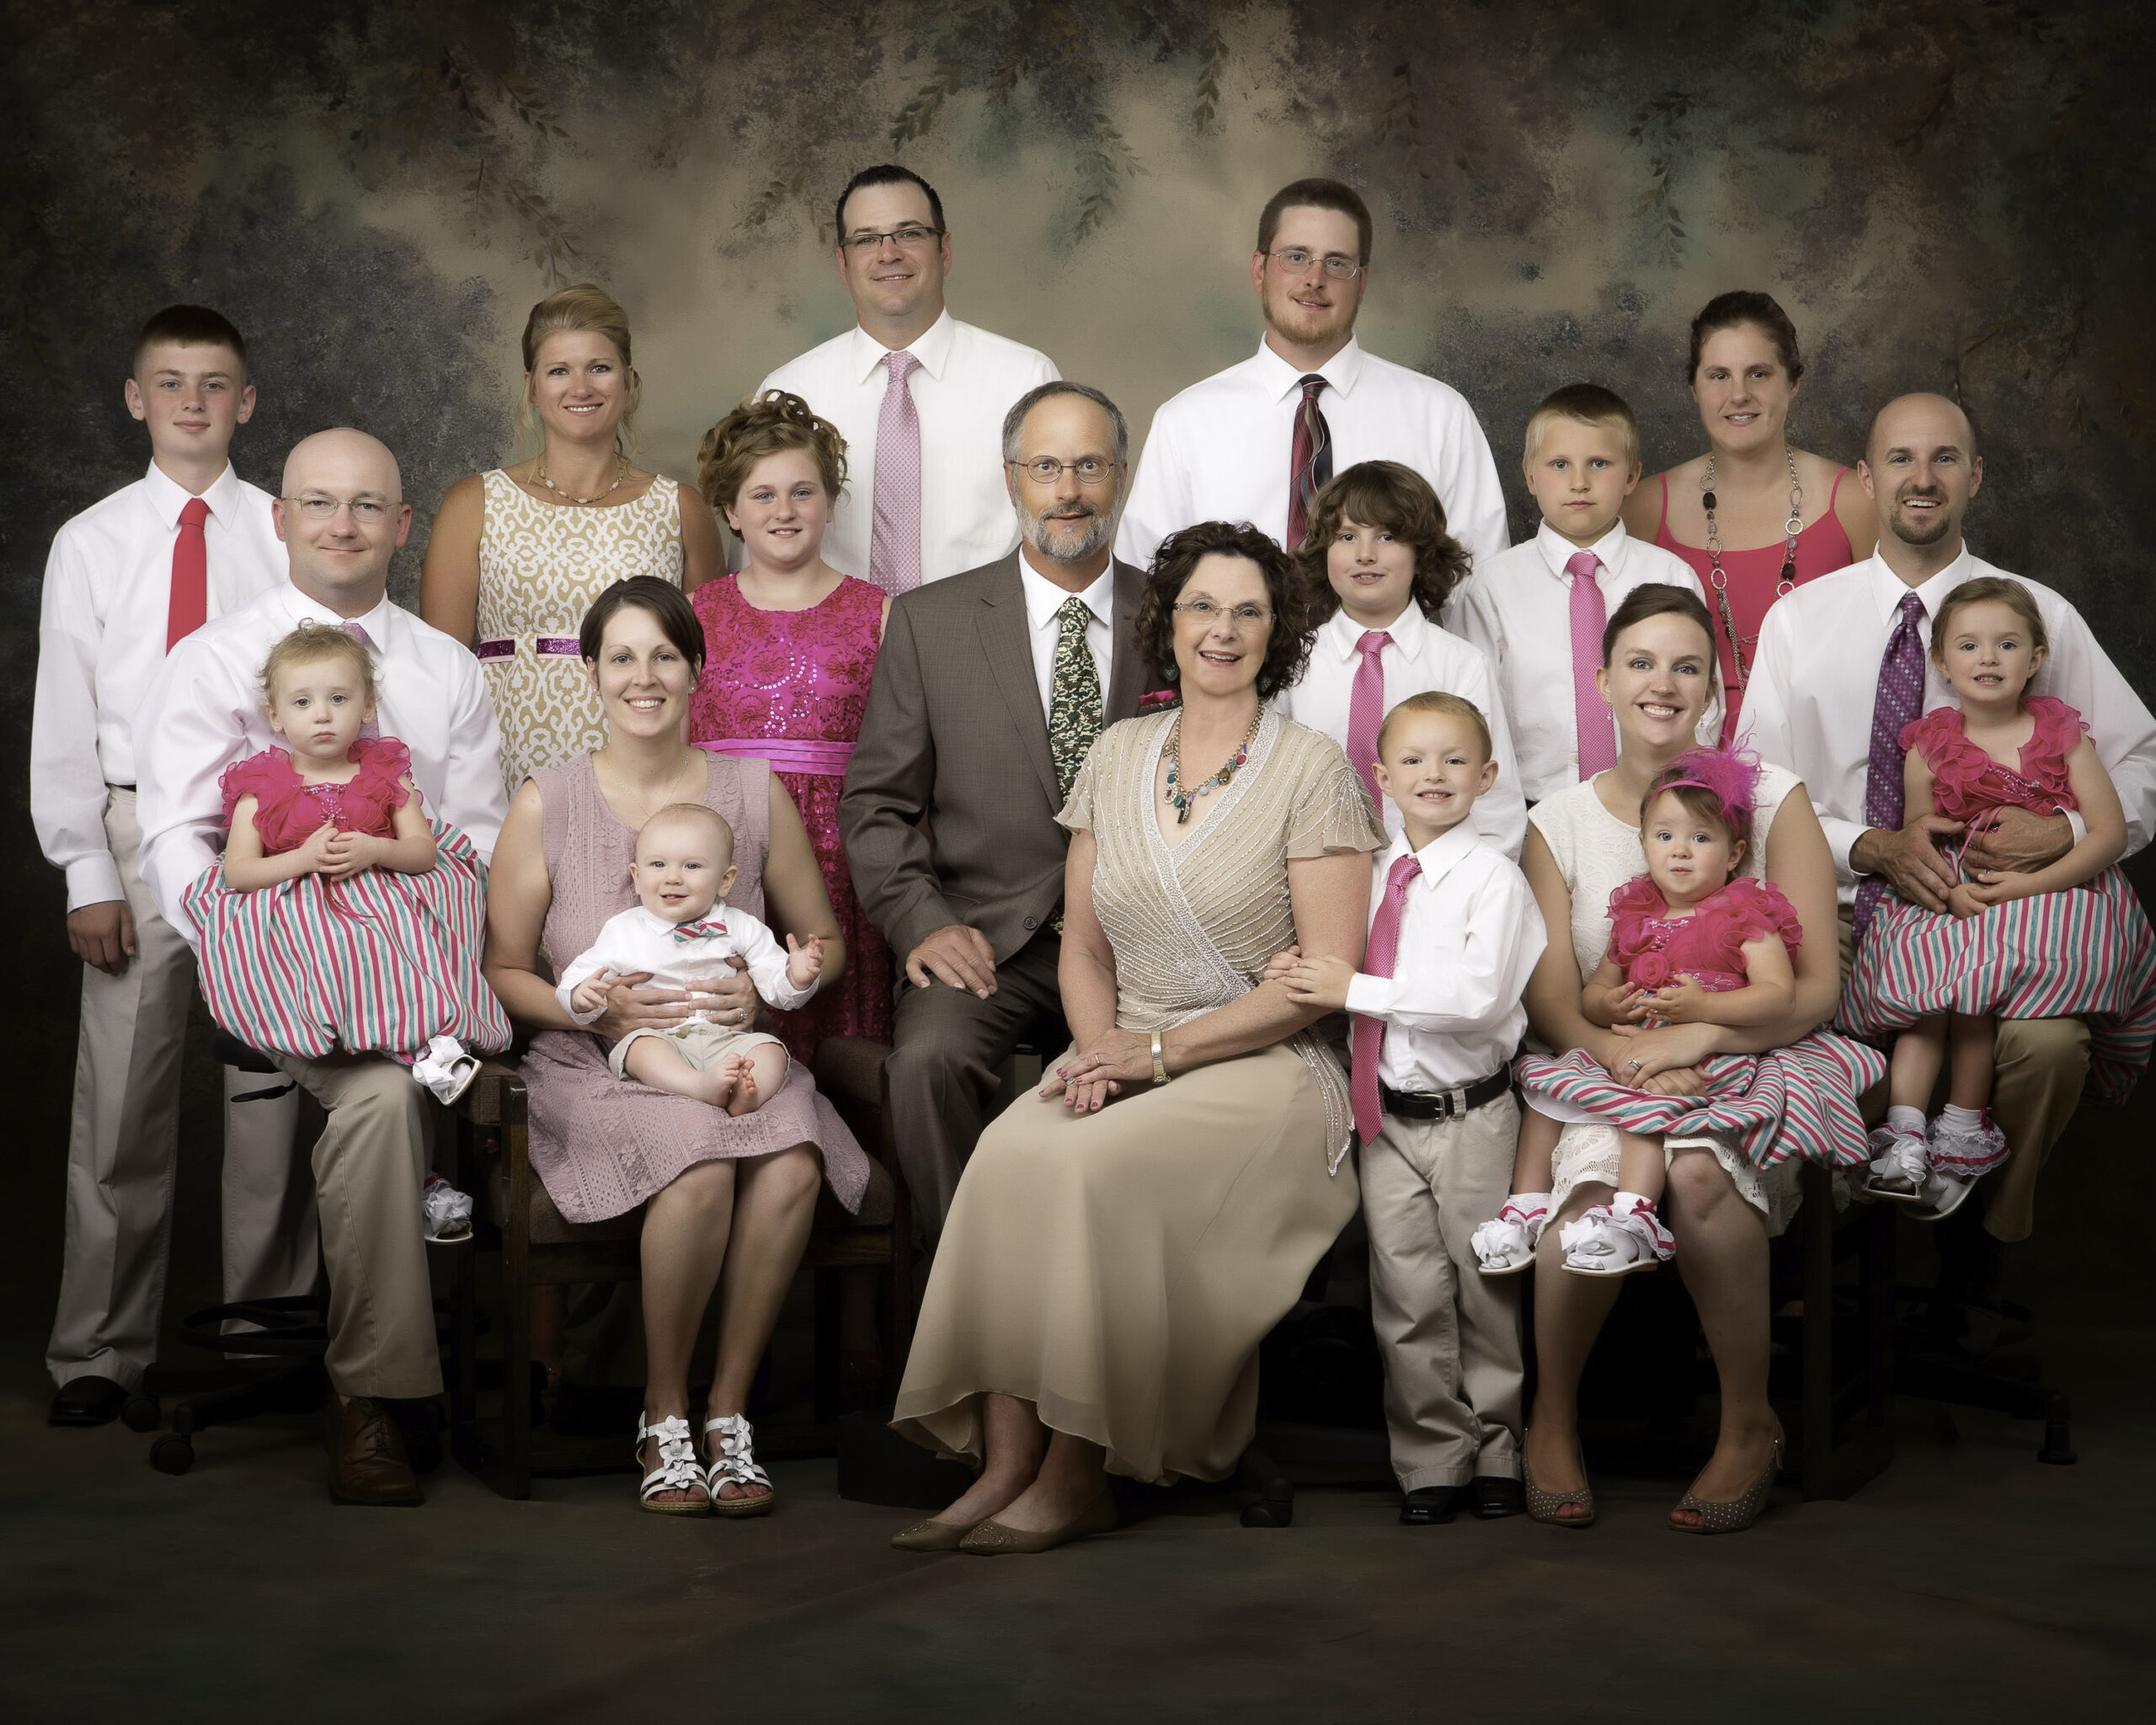 Family Group Photography General Information